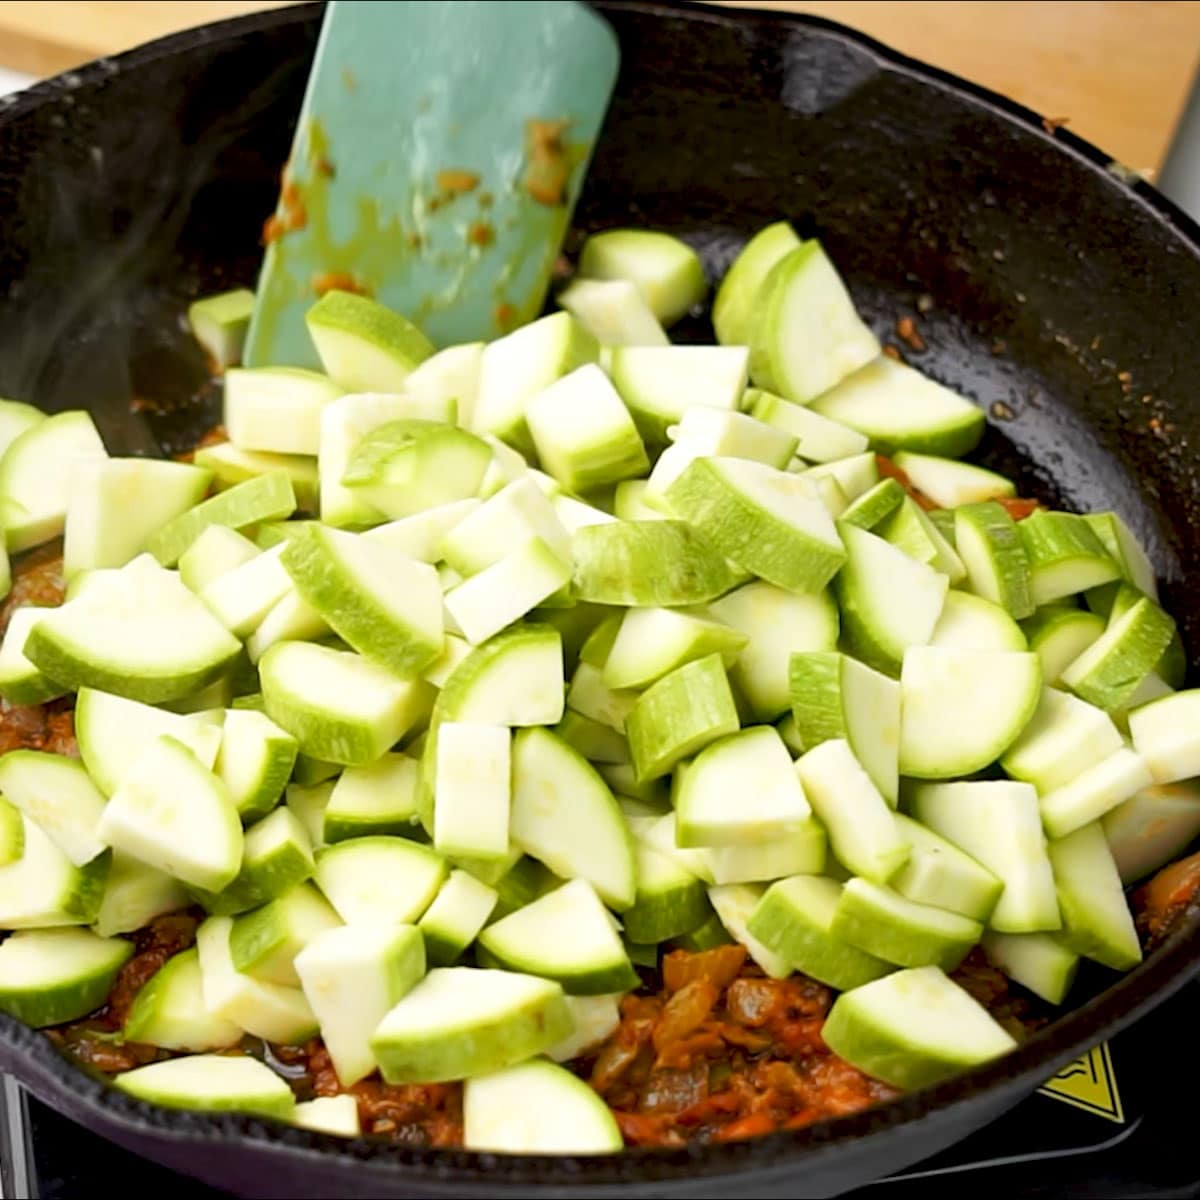 Adding sliced zucchini along with spices